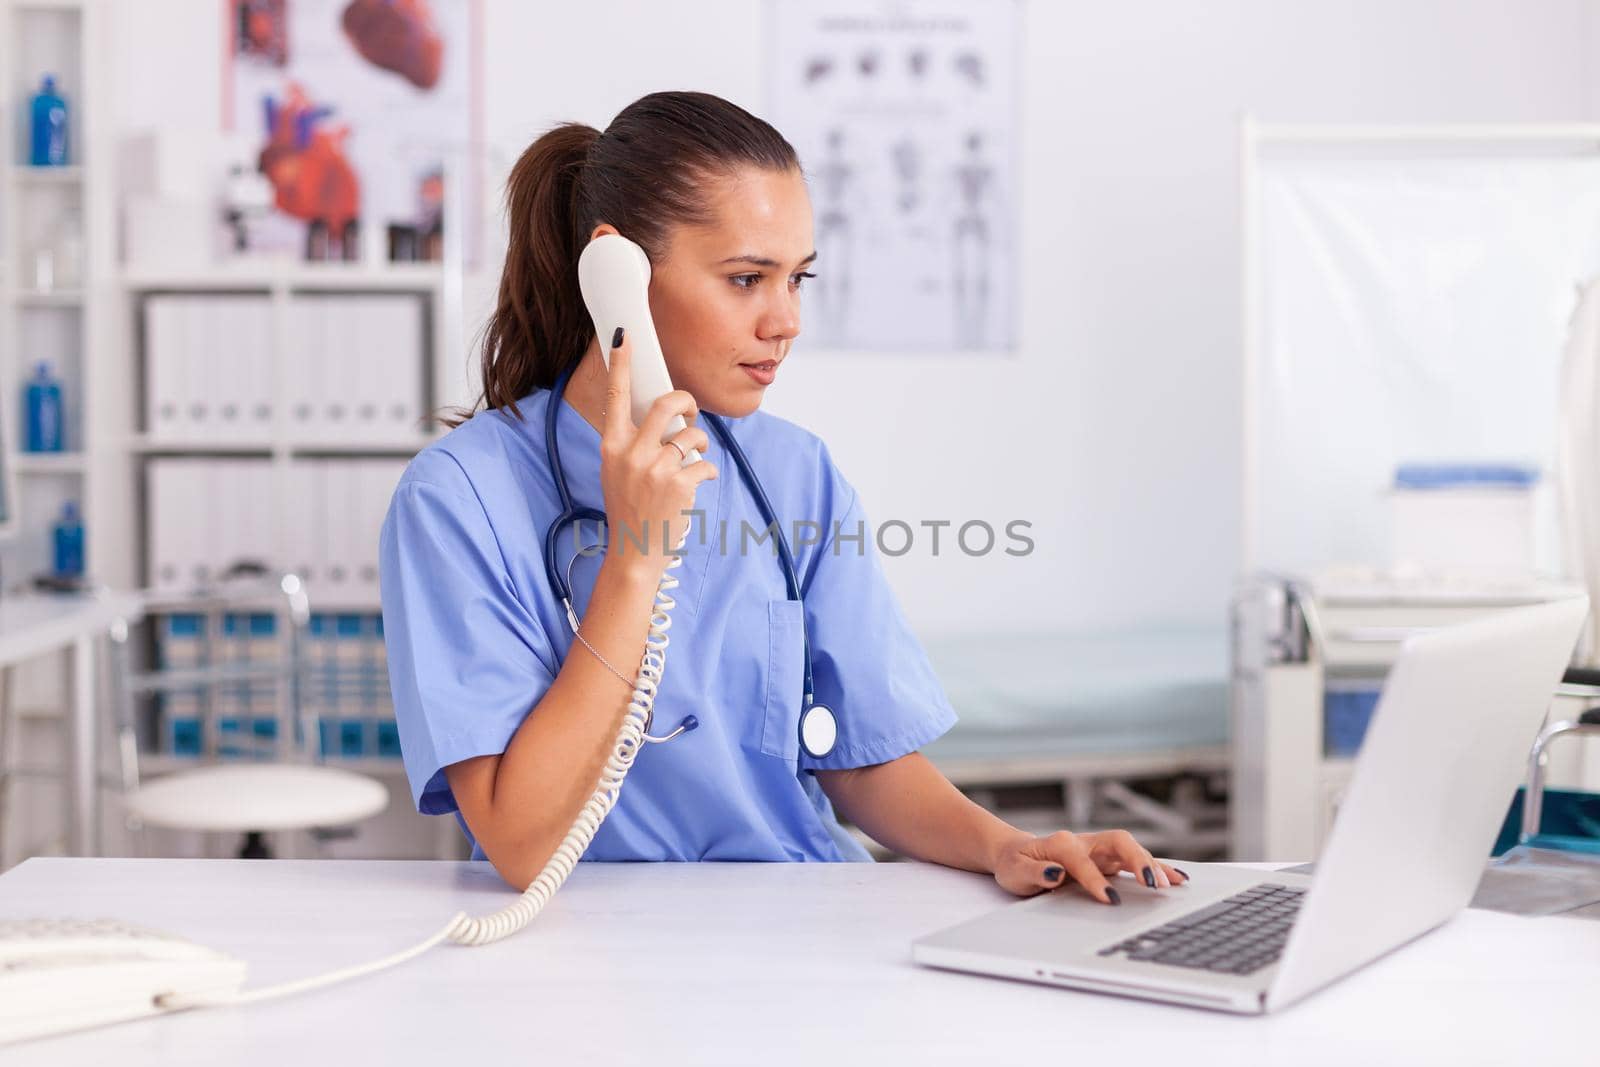 Medical practitioner answering phone calls and scheduling appointments in hospital office. Health care physician sitting at desk using computer in modern clinic looking at monitor.